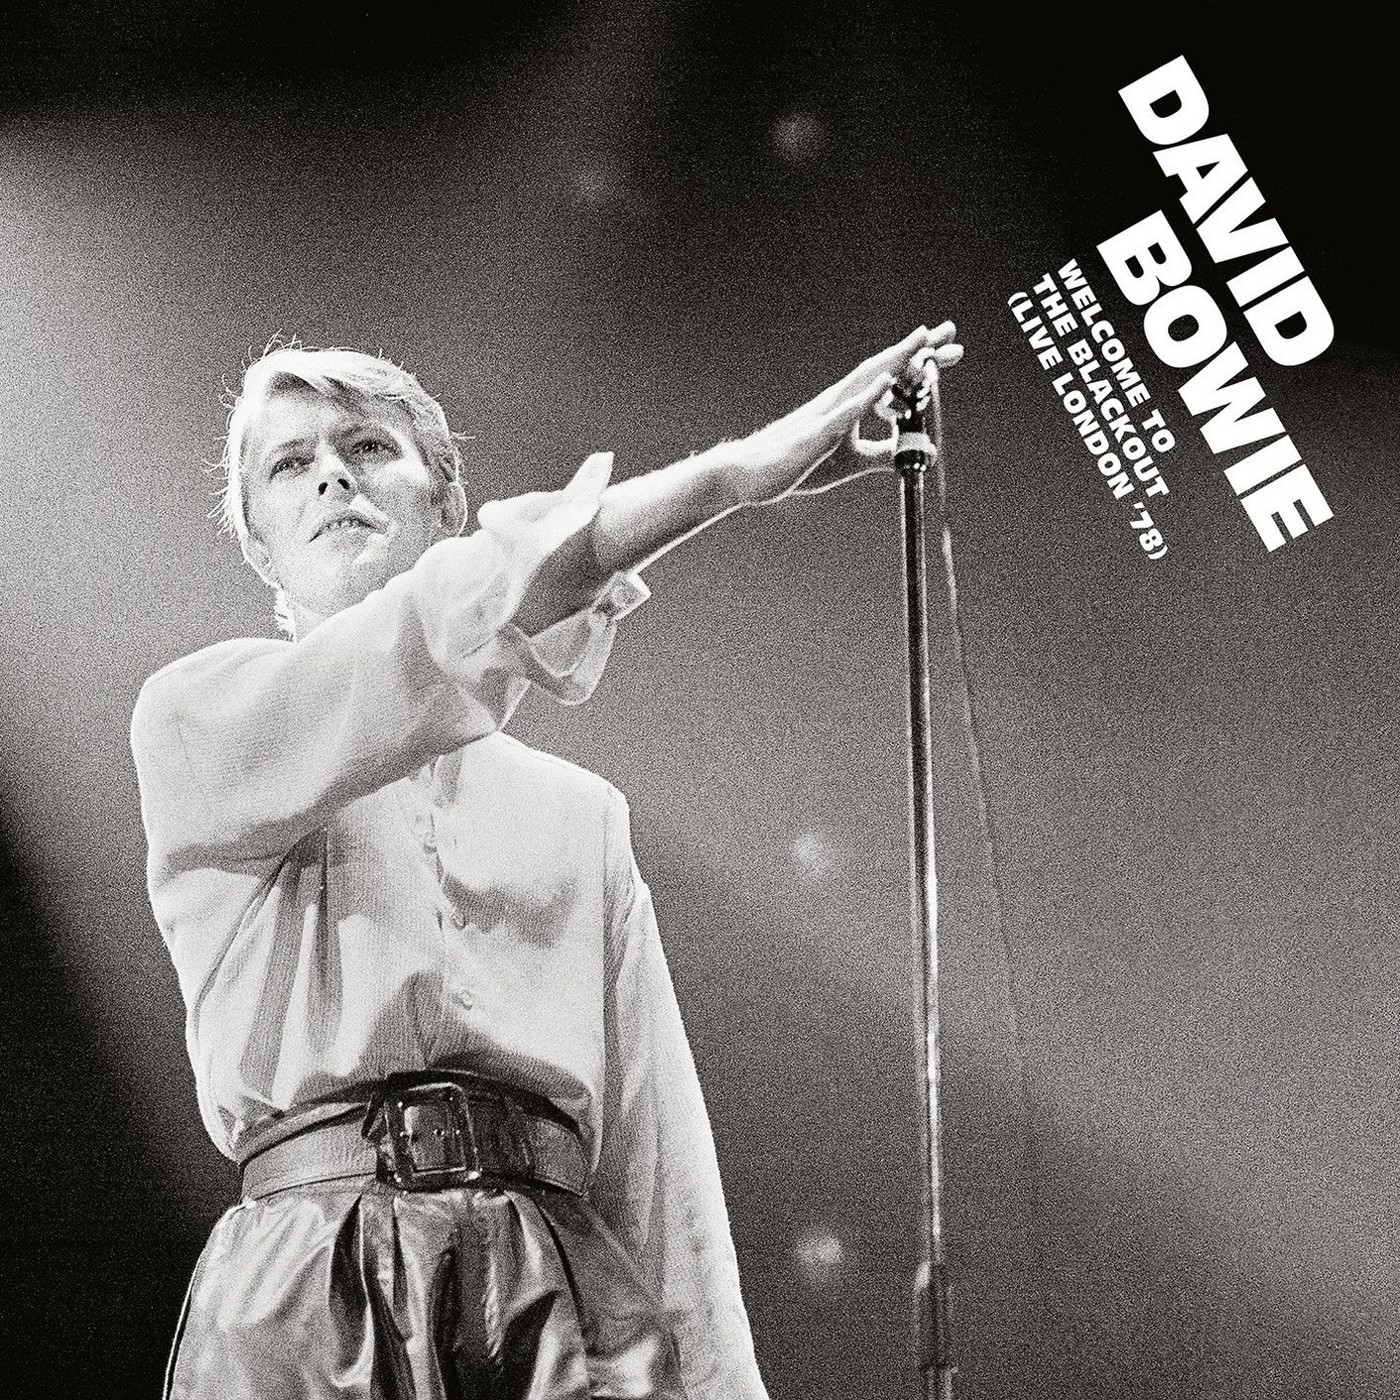 David Bowie - Welcome to the Blackout (Live in London ’78) (2018) [Qobuz FLAC 24bit/96kHz]